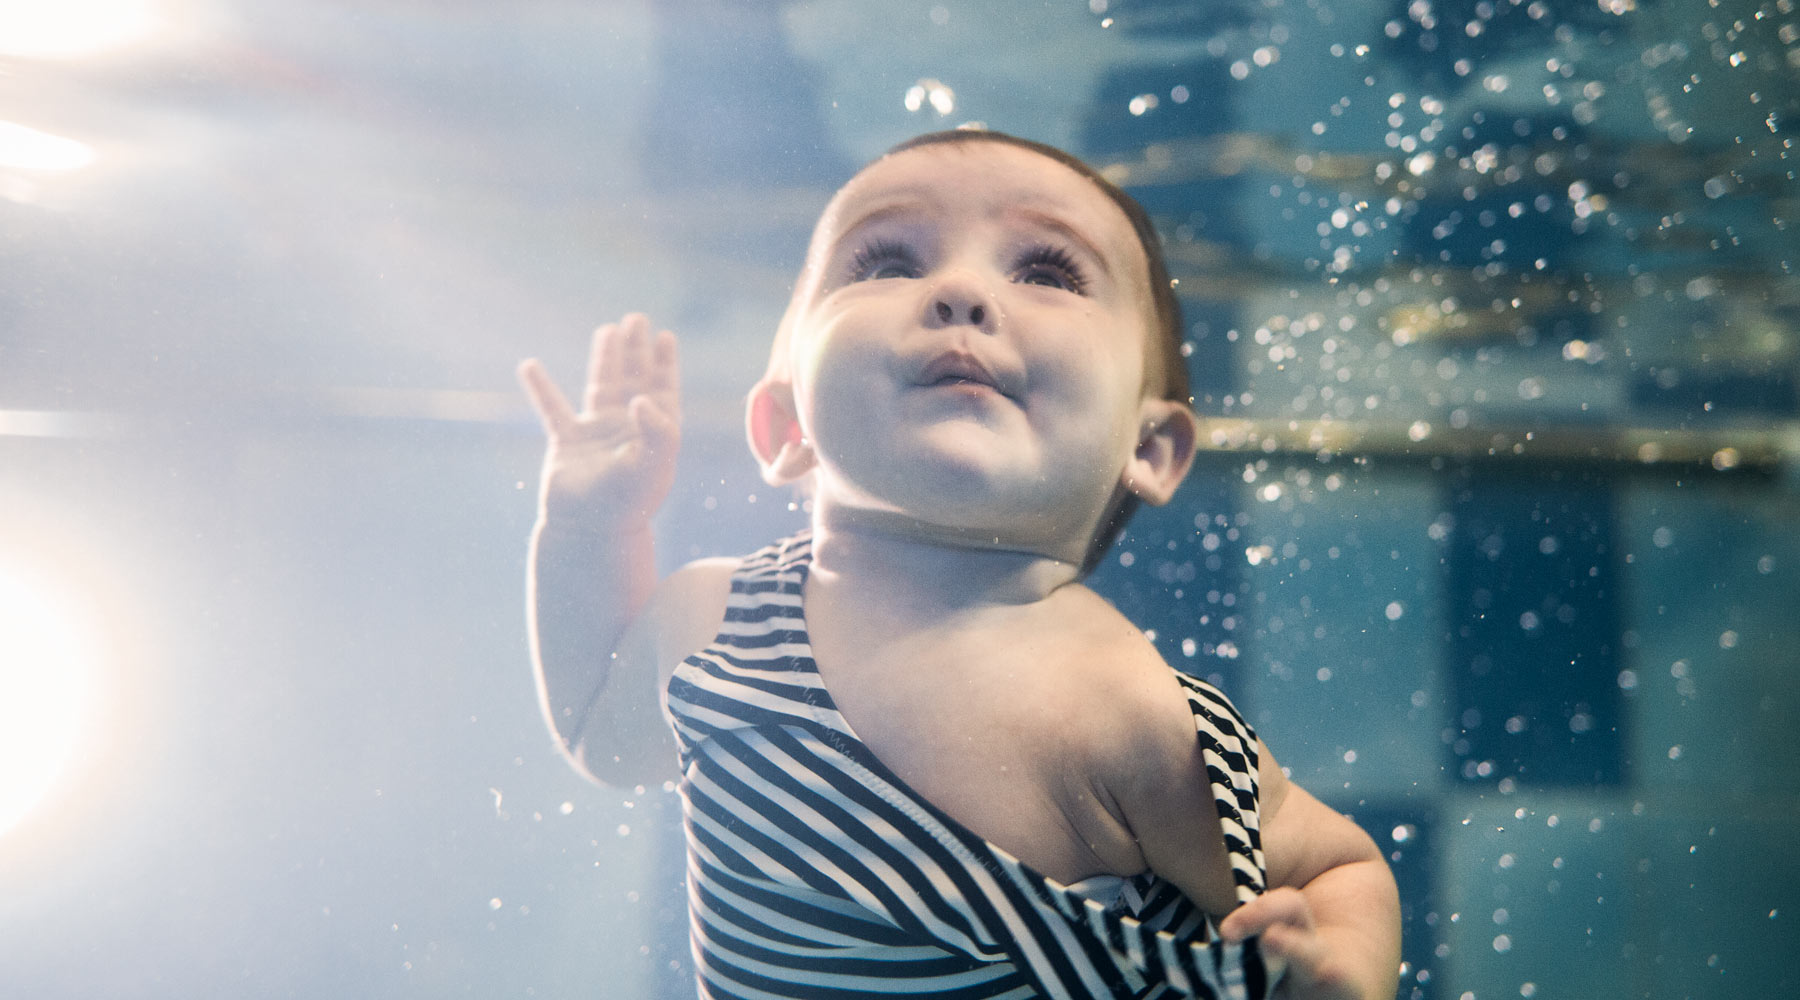 The latest news from Baby Swimming